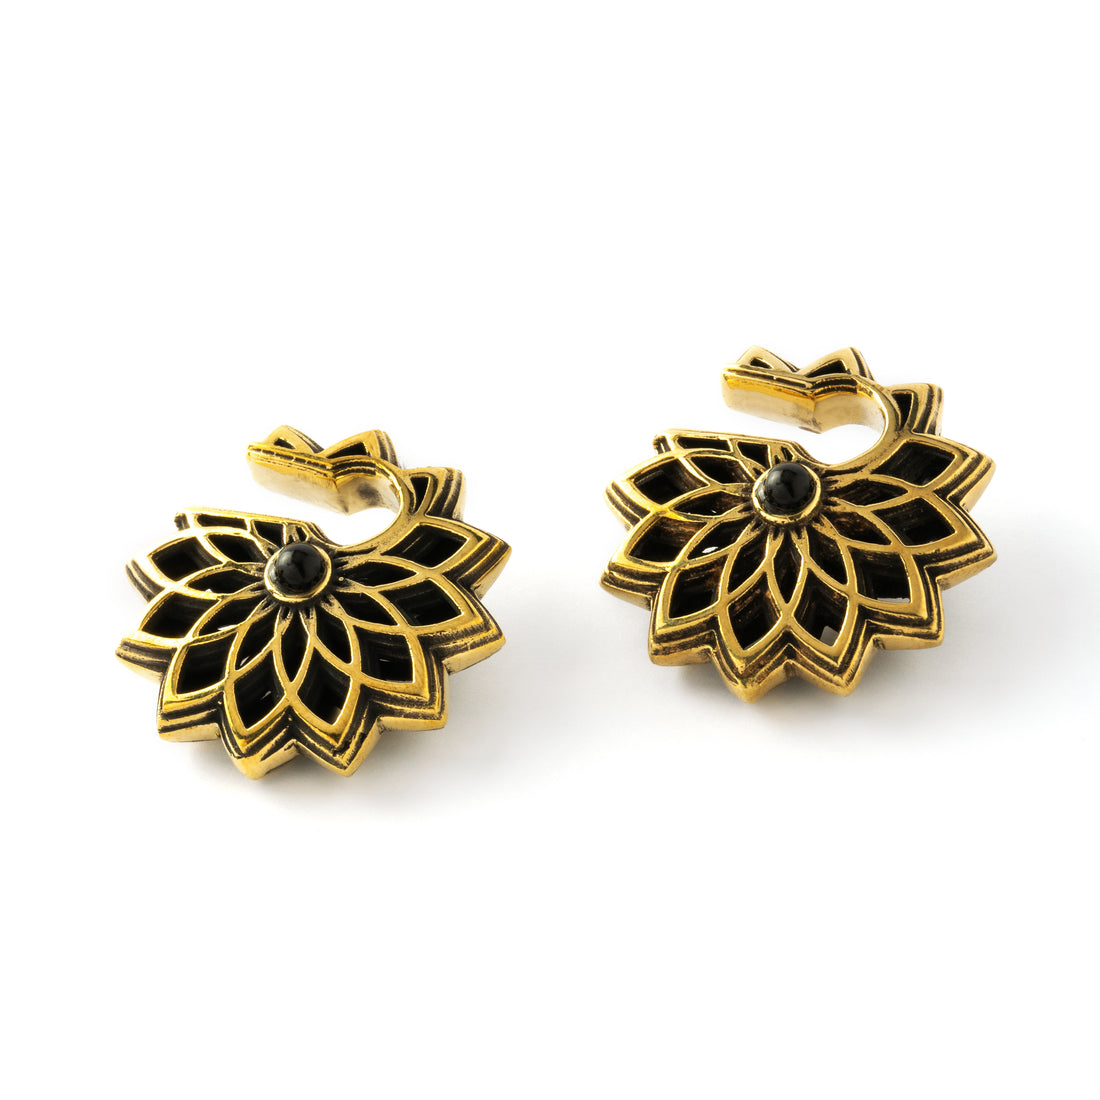 pair of antique gold colour geometric flower ear weights hangers with black onyx down view